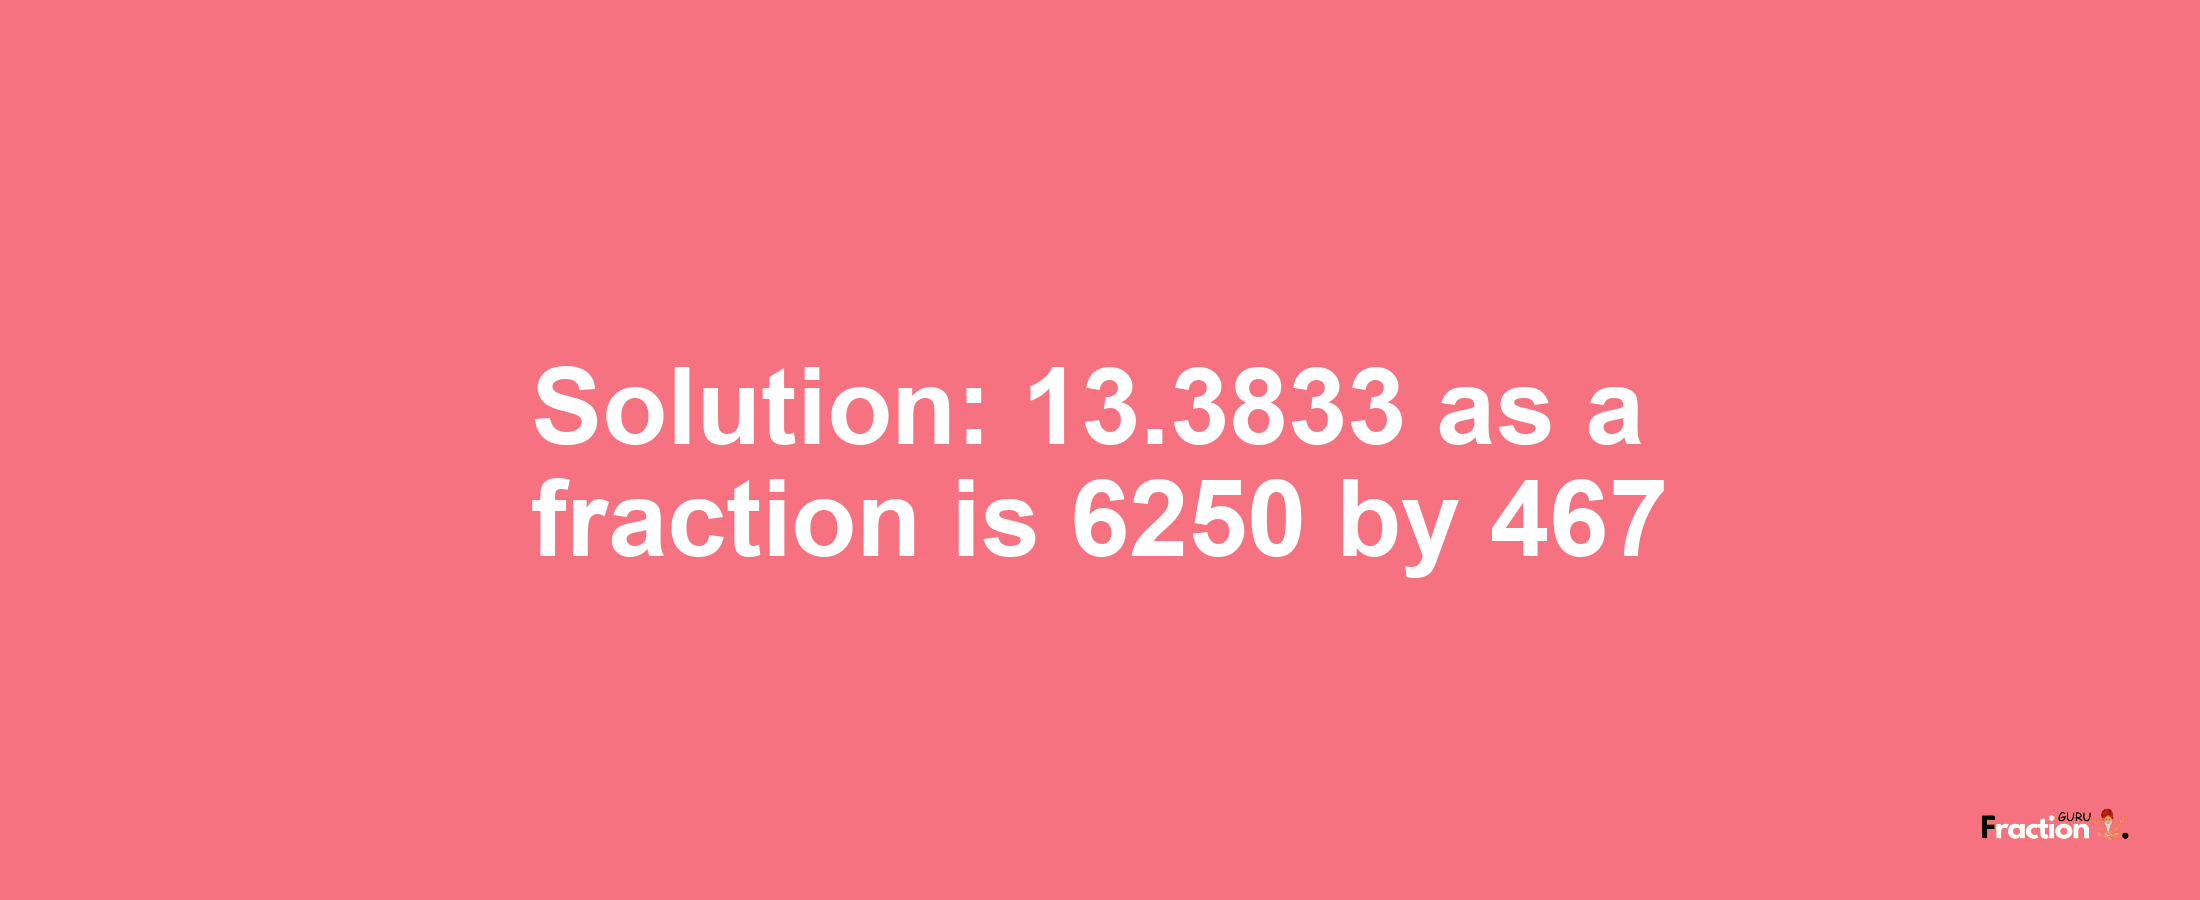 Solution:13.3833 as a fraction is 6250/467